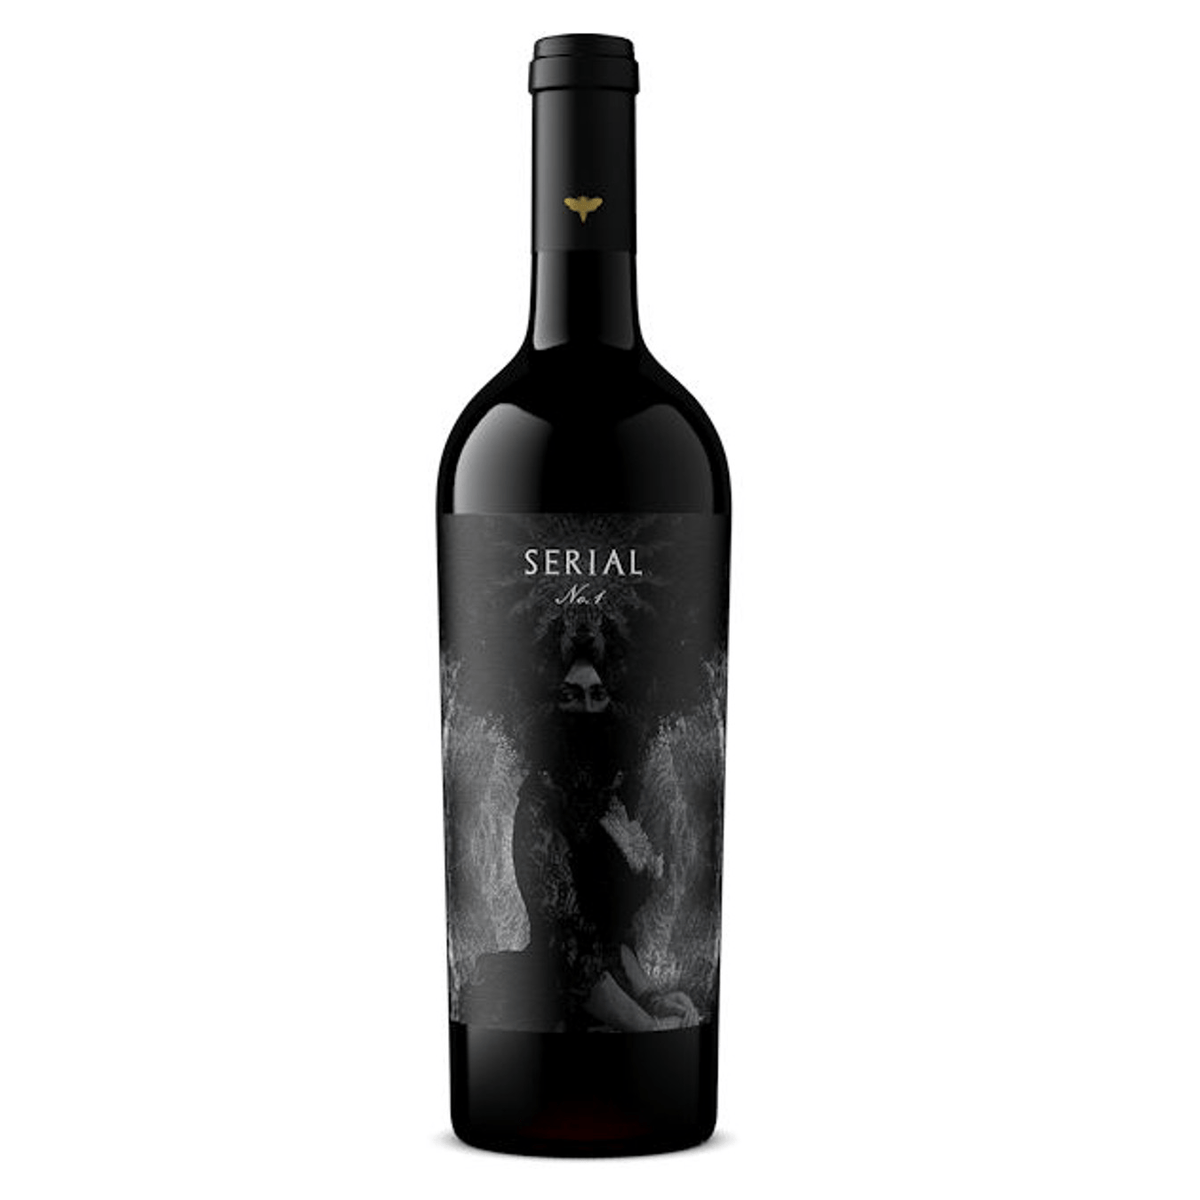 Serial Red Blend Paso Robles 2017 - Barbank